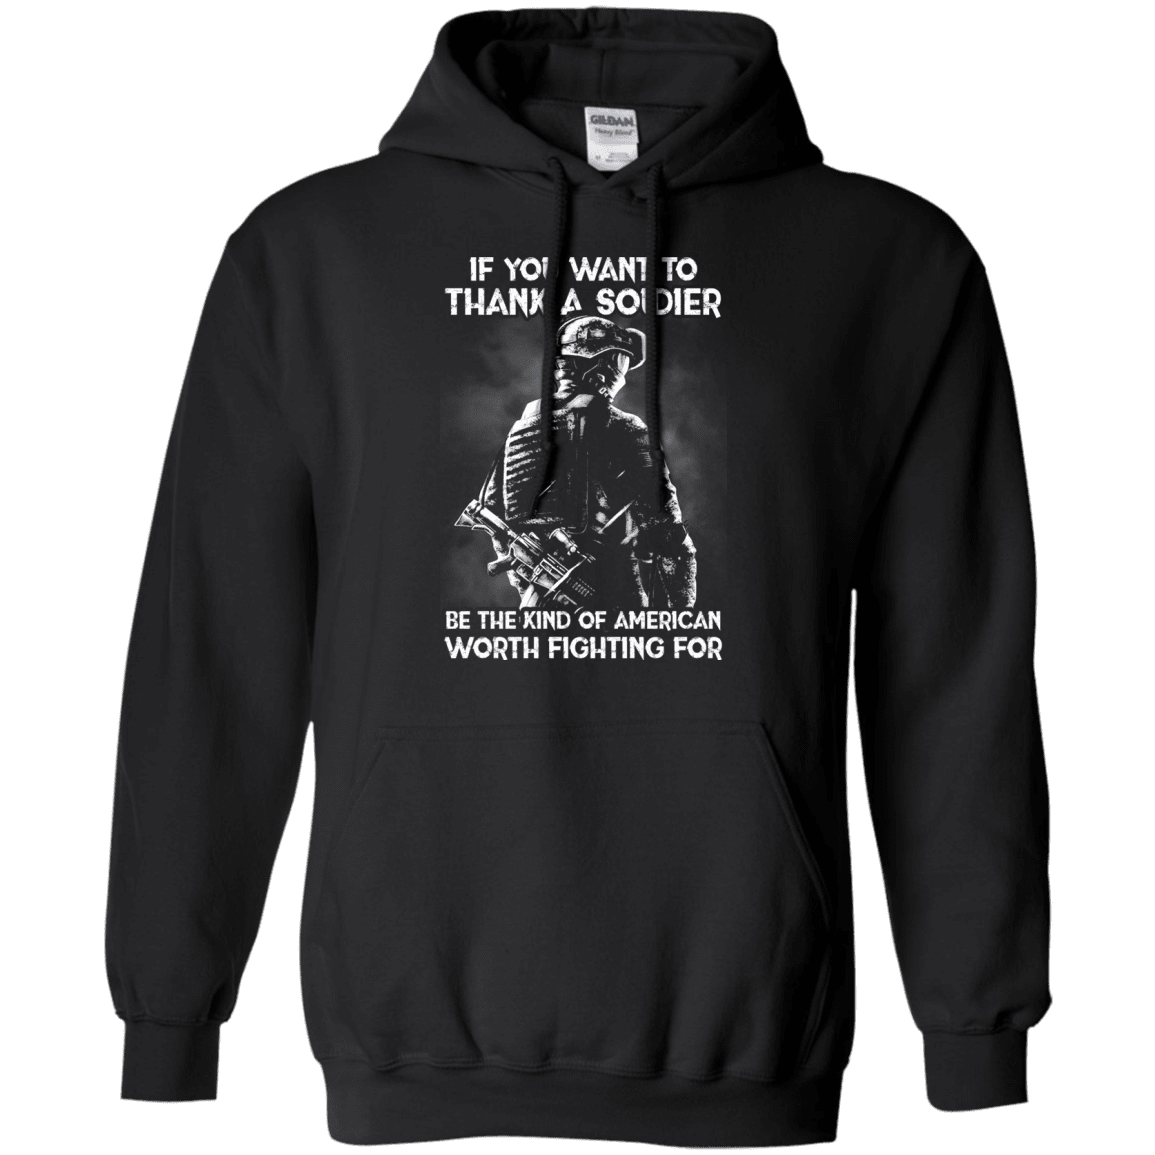 Military T-Shirt "If You Want To Thank A Soldier"-TShirt-General-Veterans Nation